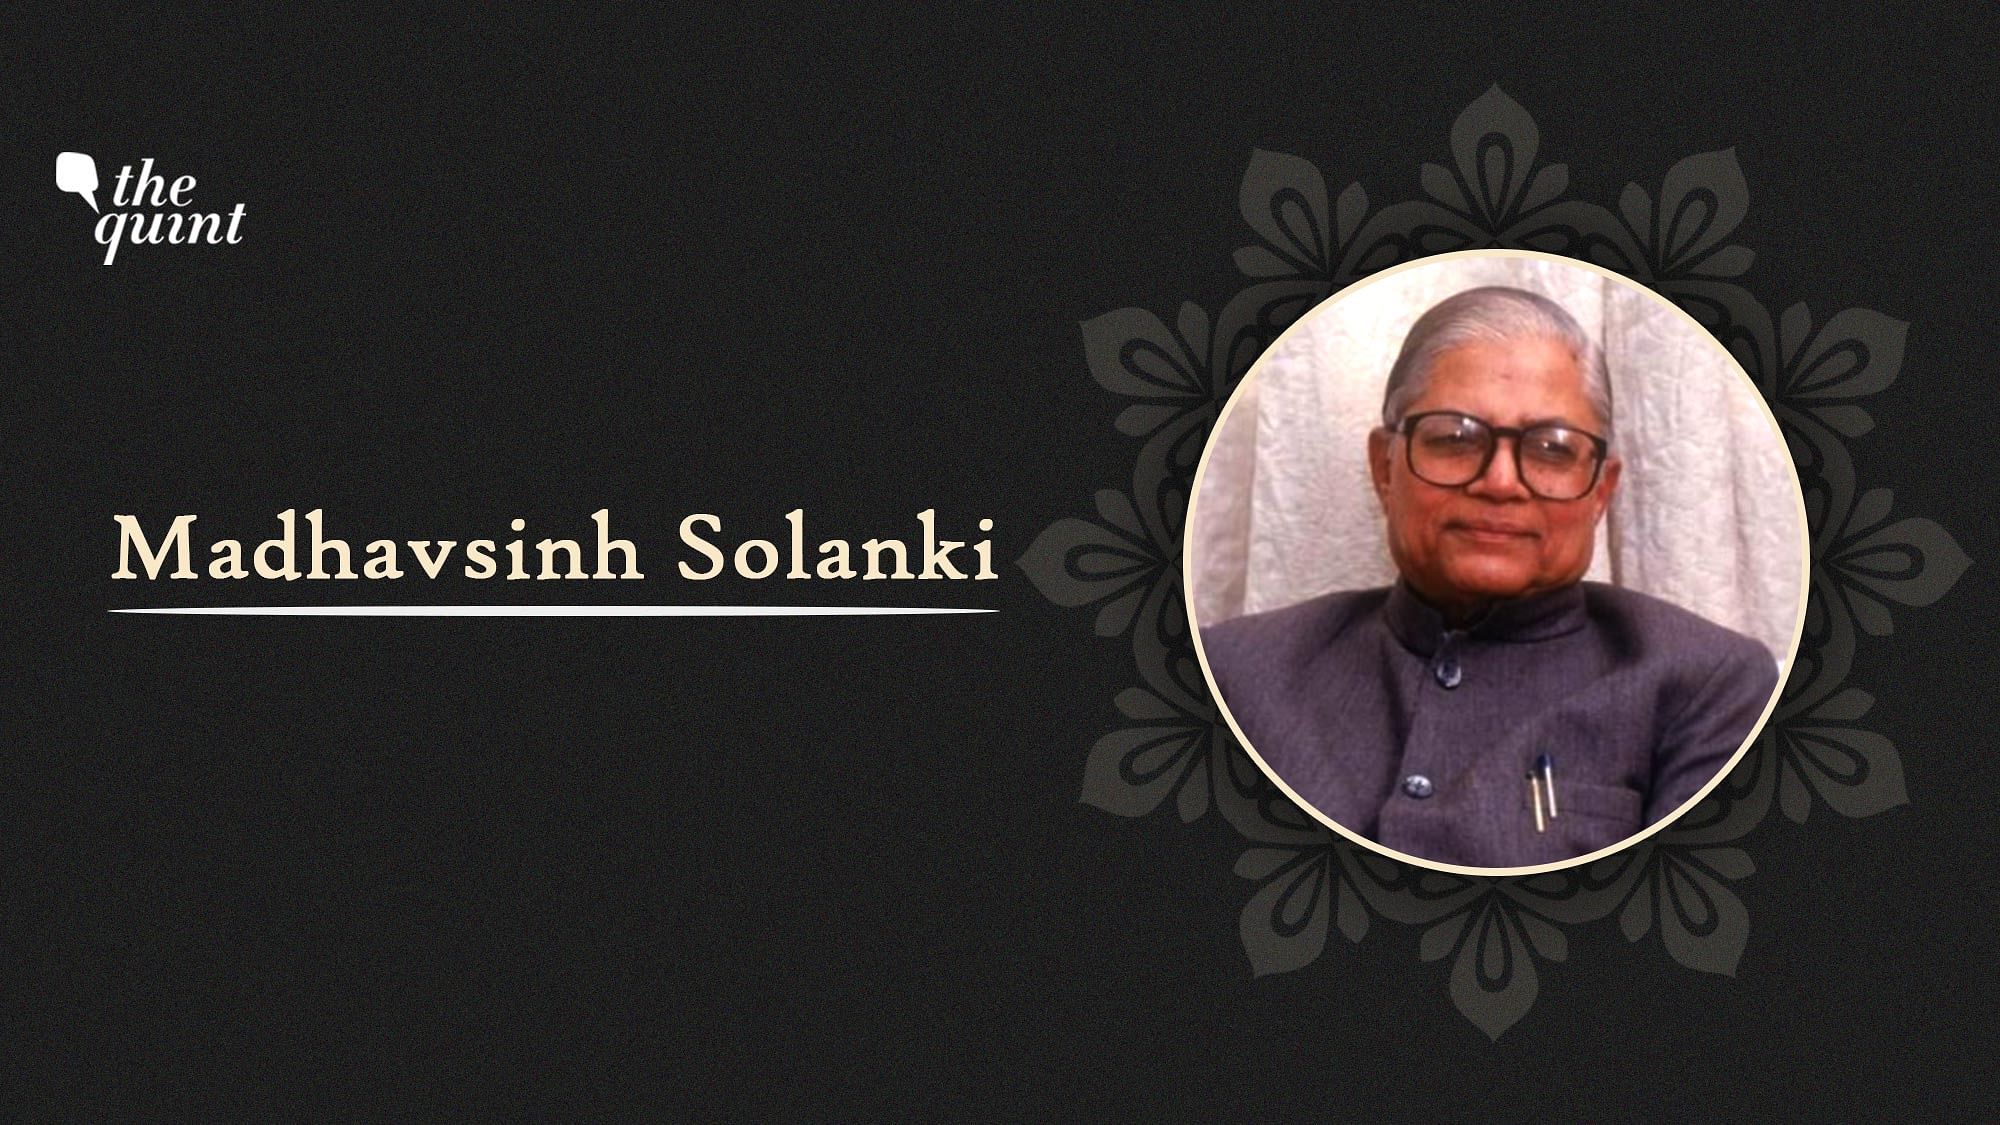 Four-time chief minister of Gujarat, Madhavsinh Solanki died on 9 January.